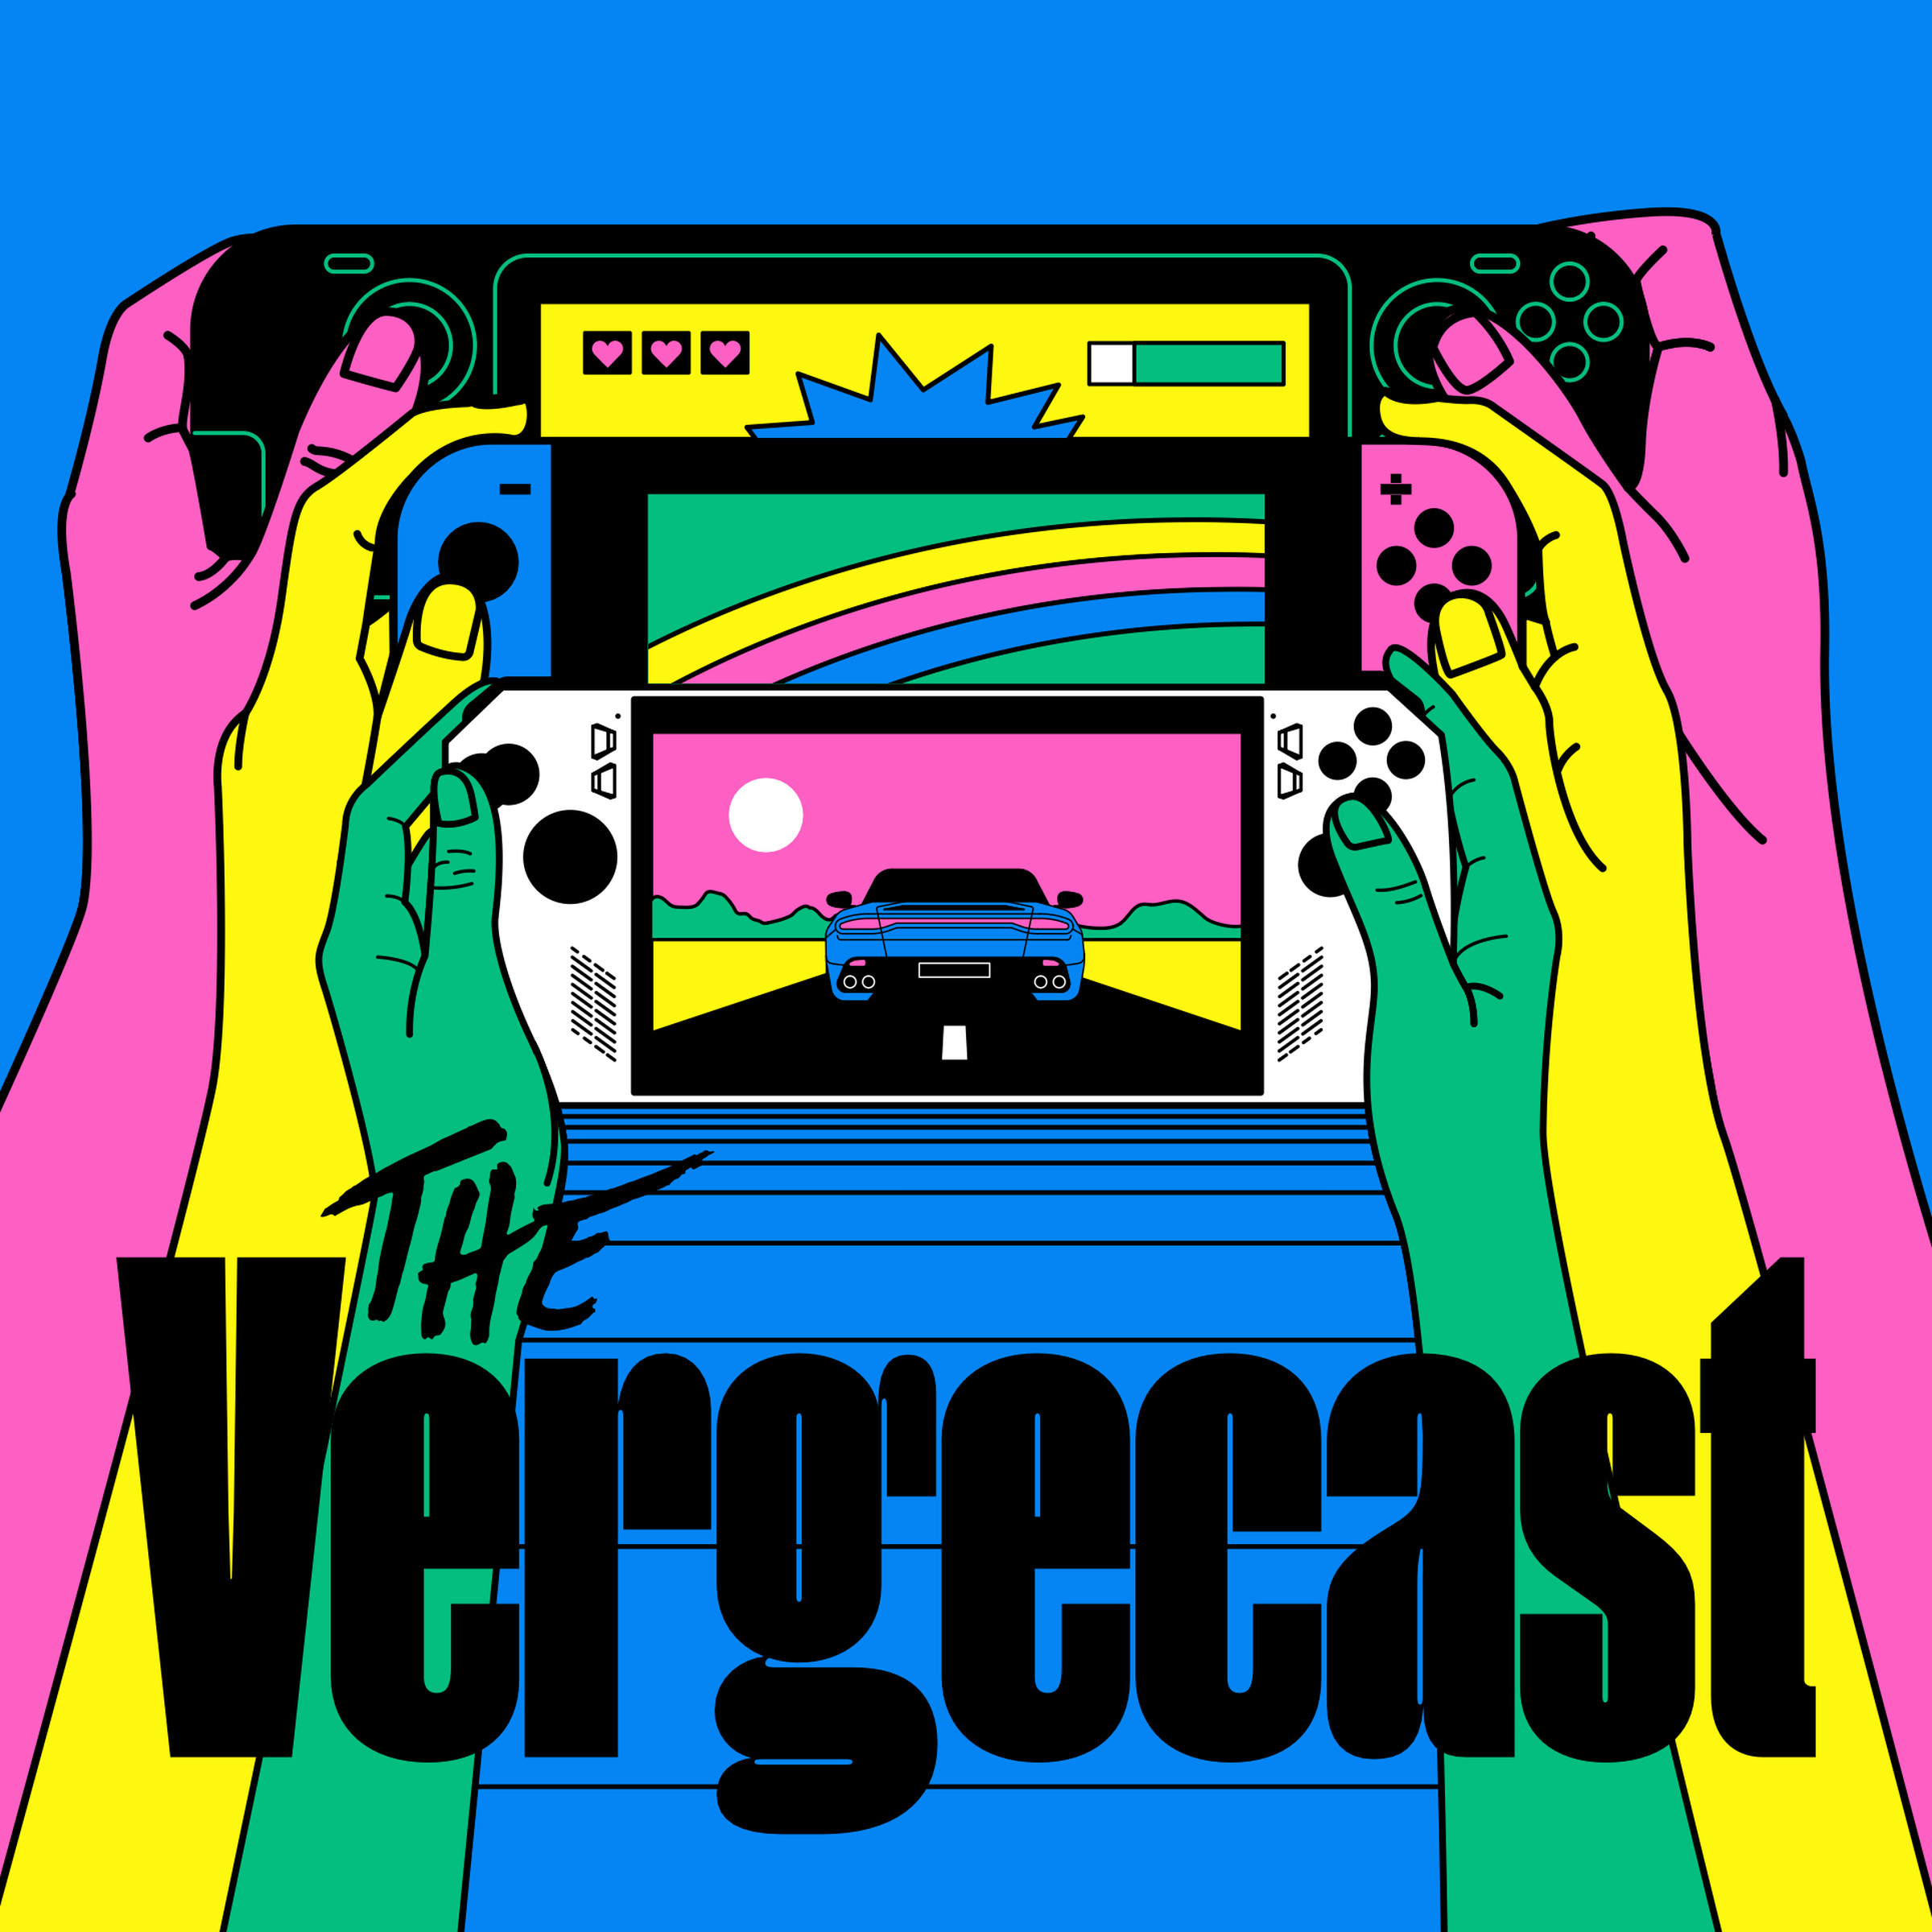 Illustration of the Vergecast logo with handheld gaming consoles